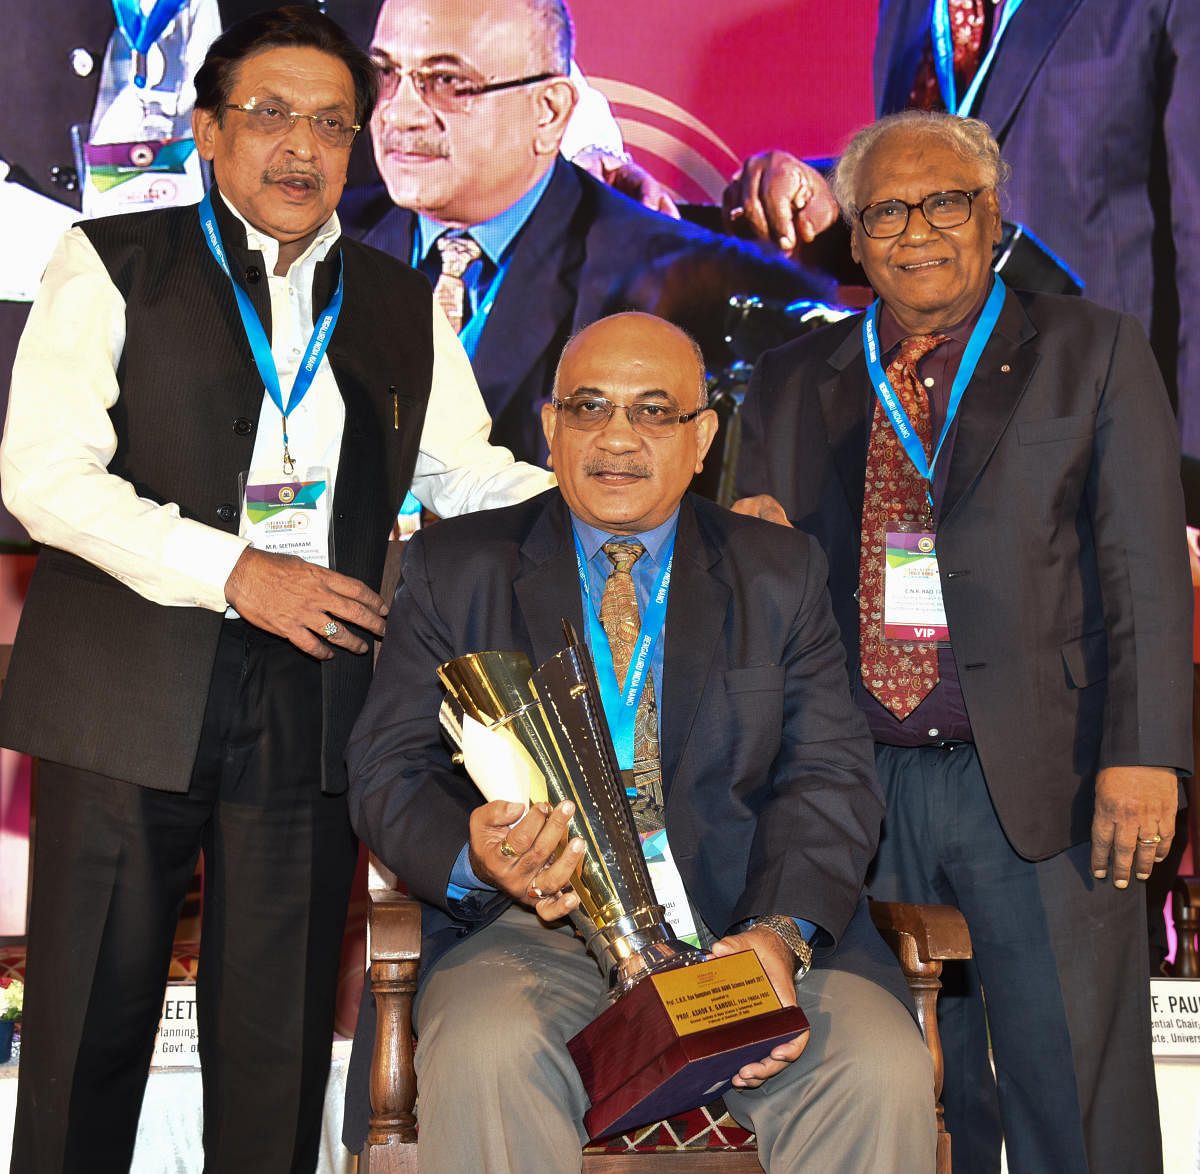 M R Seetharam, Science and Technology Minster presenting Prof CNR Rao Bangalore India NANO Science 2017 award to Prof Ashok K Ganguli, Institute of Nano Science and Technology, Mohali, Punjab at the inaugural programme of 9th Bengaluru India Nano conference organised by Dept of Science and Technology, Vision Group on Nanotechnology at Lalith Ashok hotel in Bengaluru on Thursday. C N R Rao, Chairman, Vision Group on Nanotechnology also seen. Photo by S K Dinesh